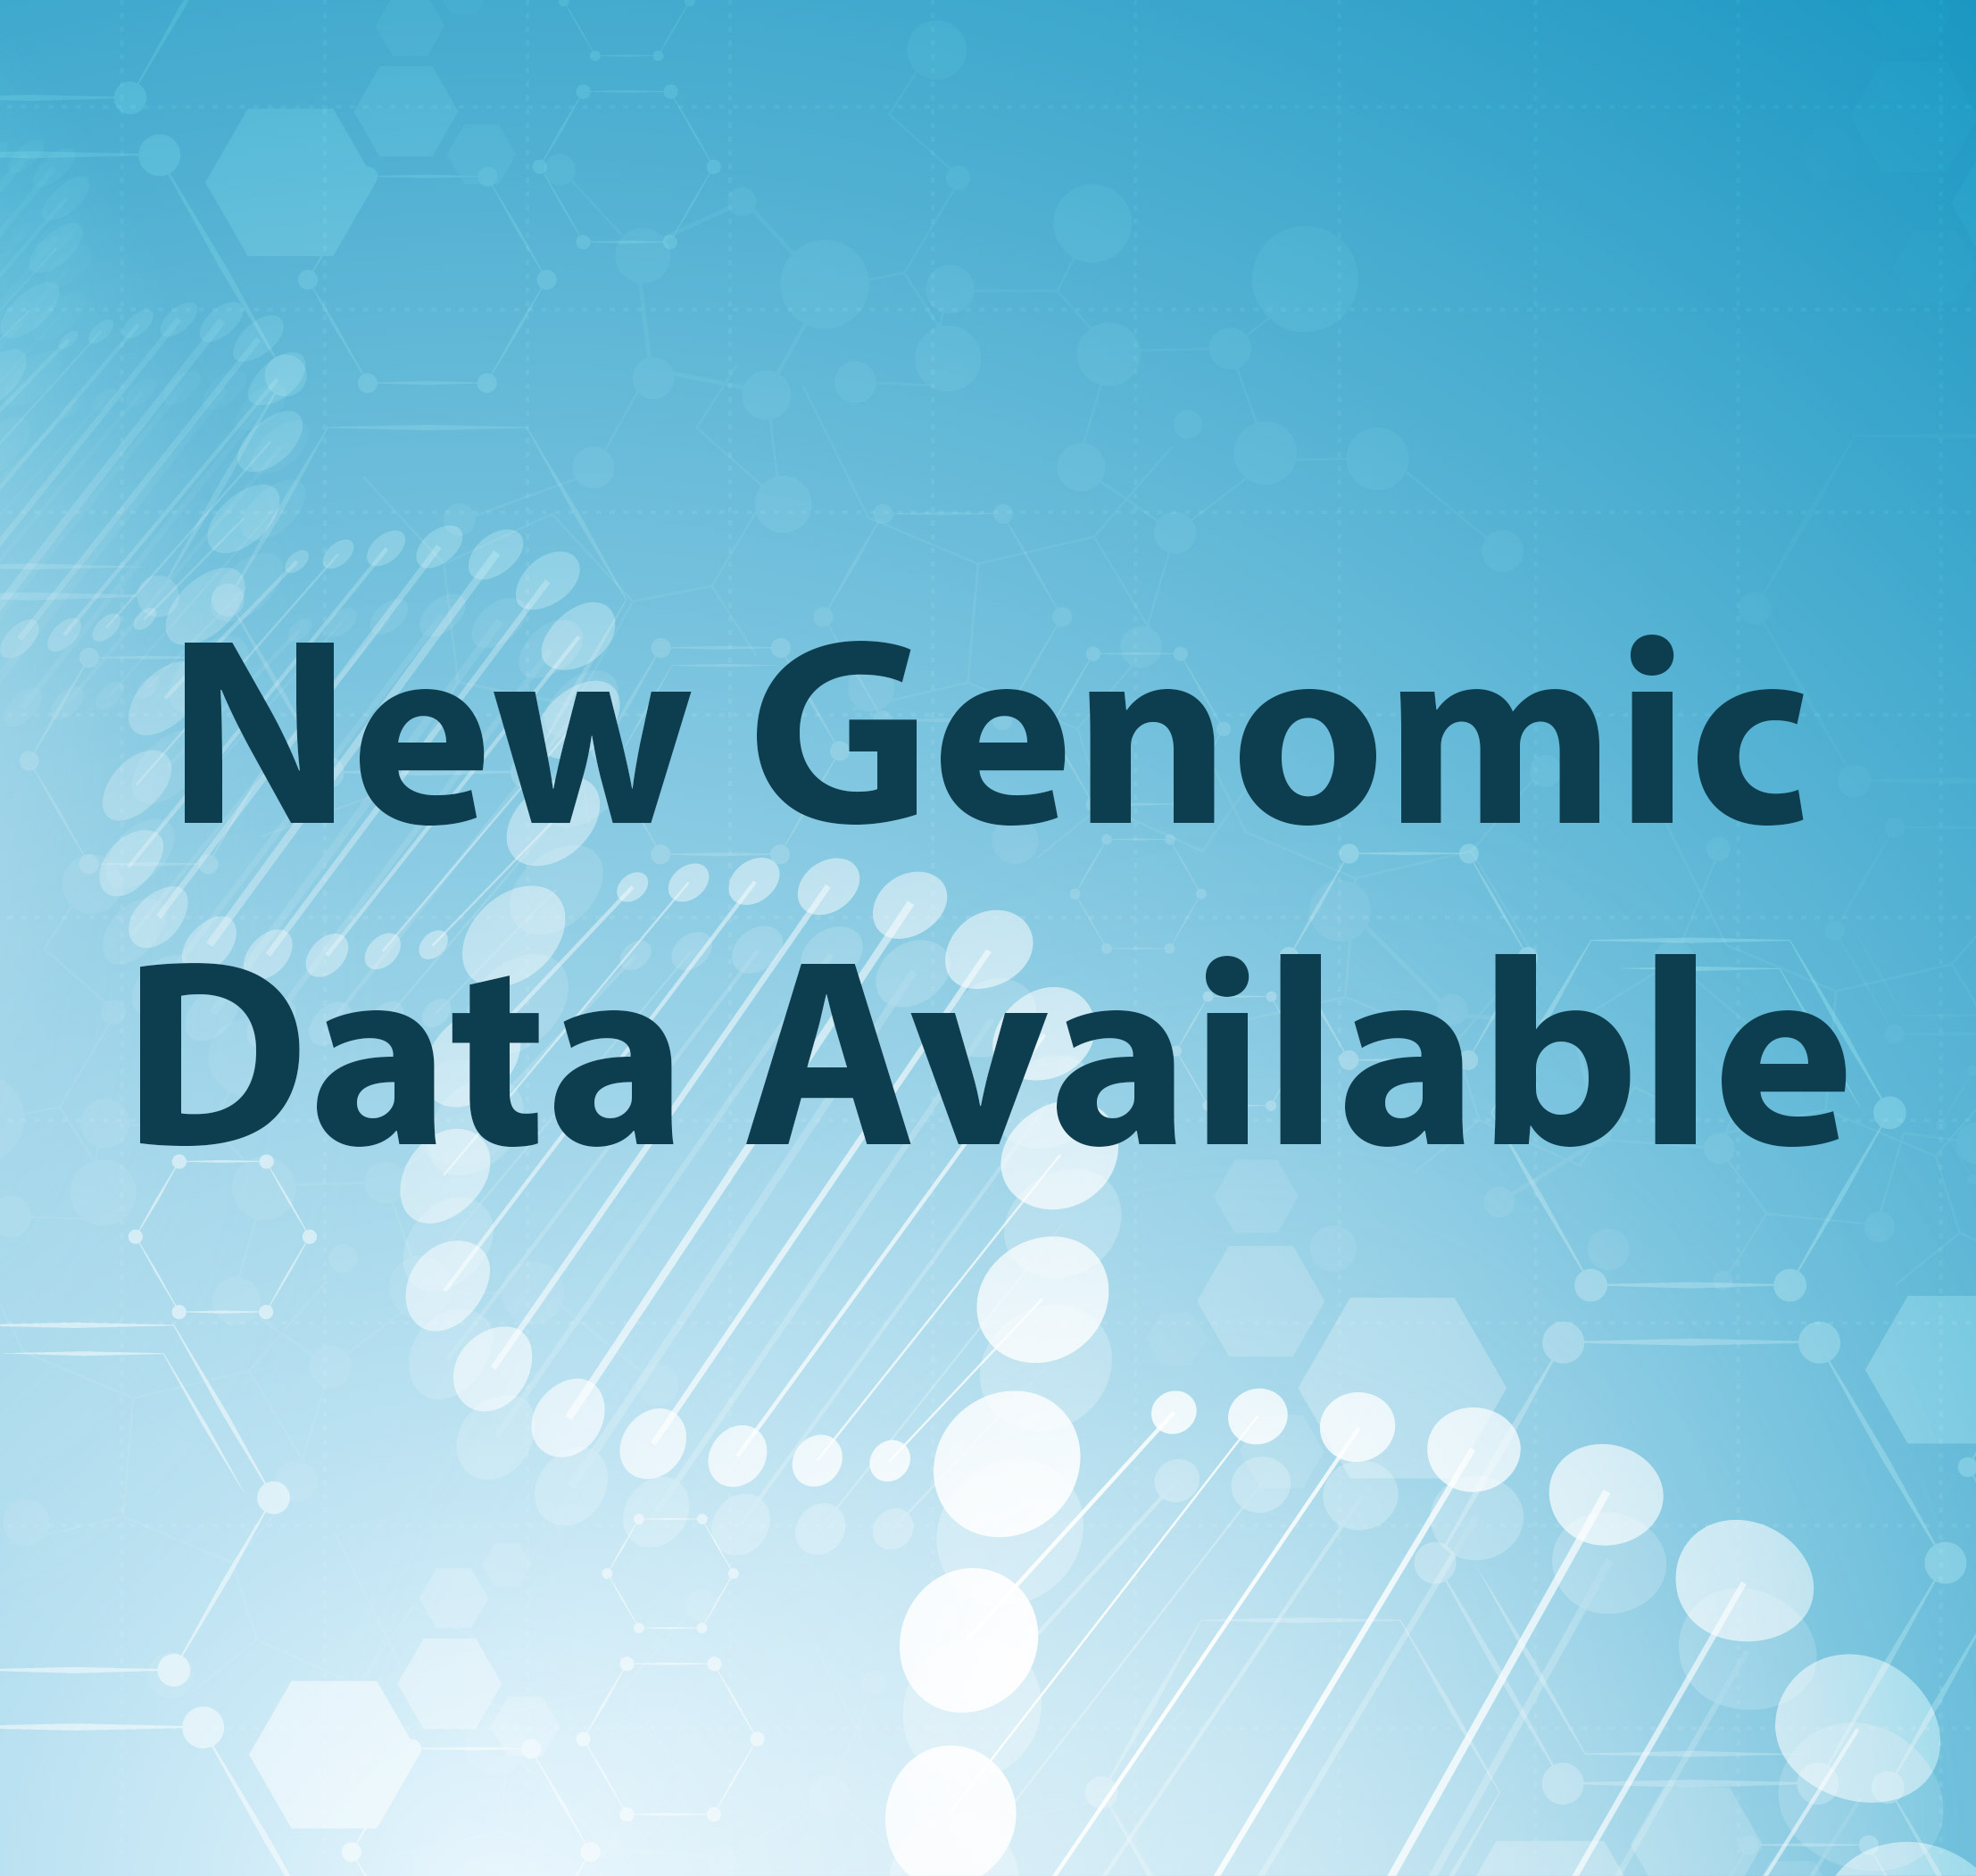 Abstract image of DNA on blue background with text in the foreground stating: “New Genomic Data Available”